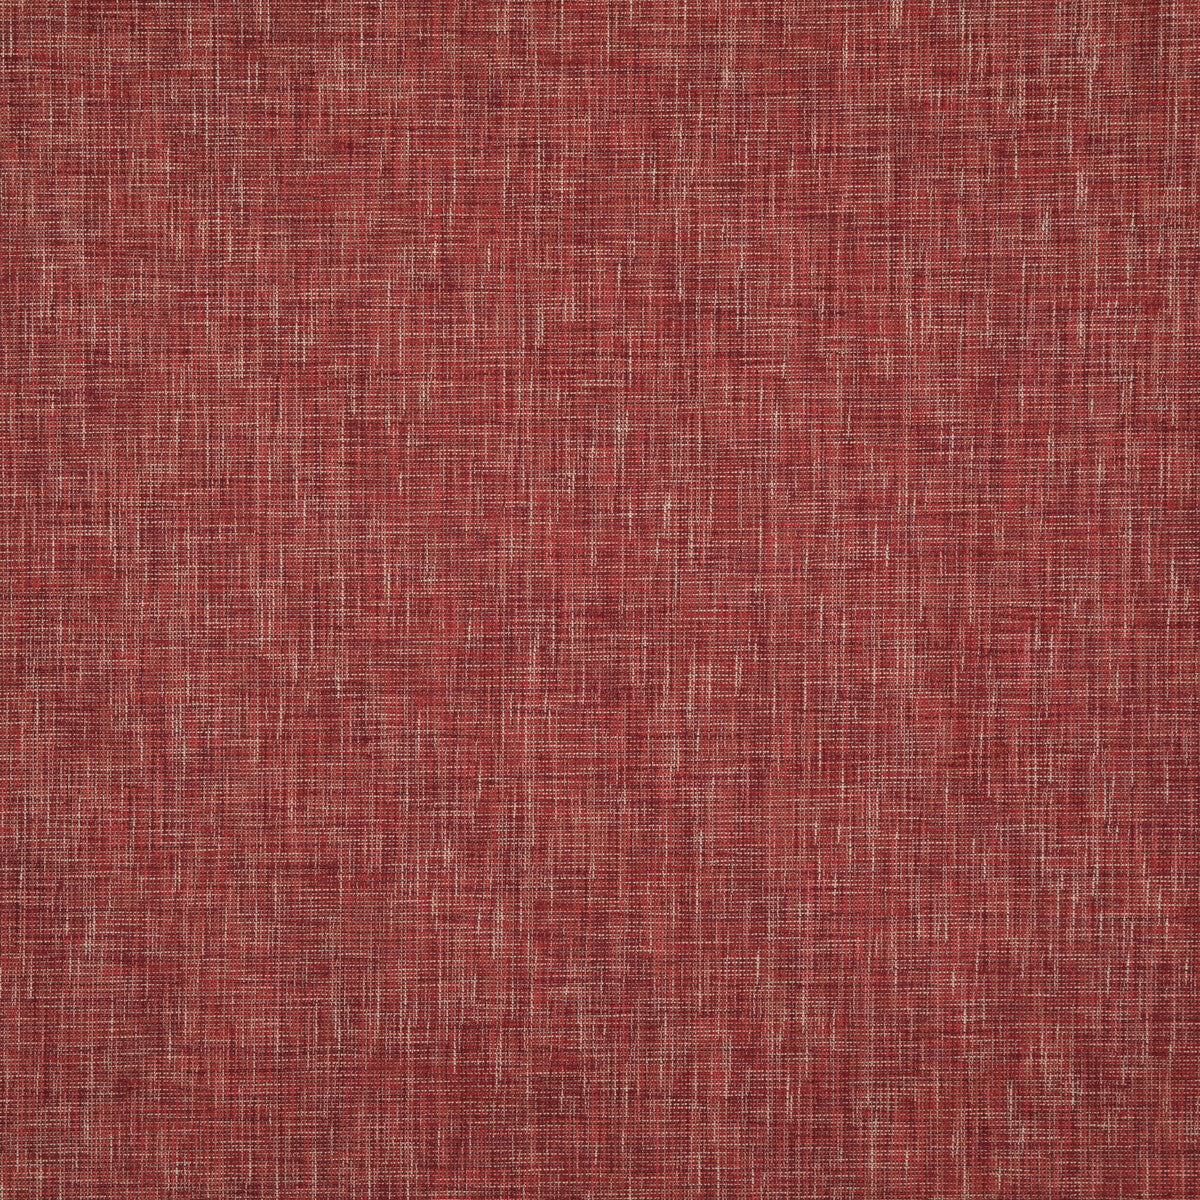 Temae Texture fabric in red color - pattern 8018107.19.0 - by Brunschwig &amp; Fils in the Baret collection